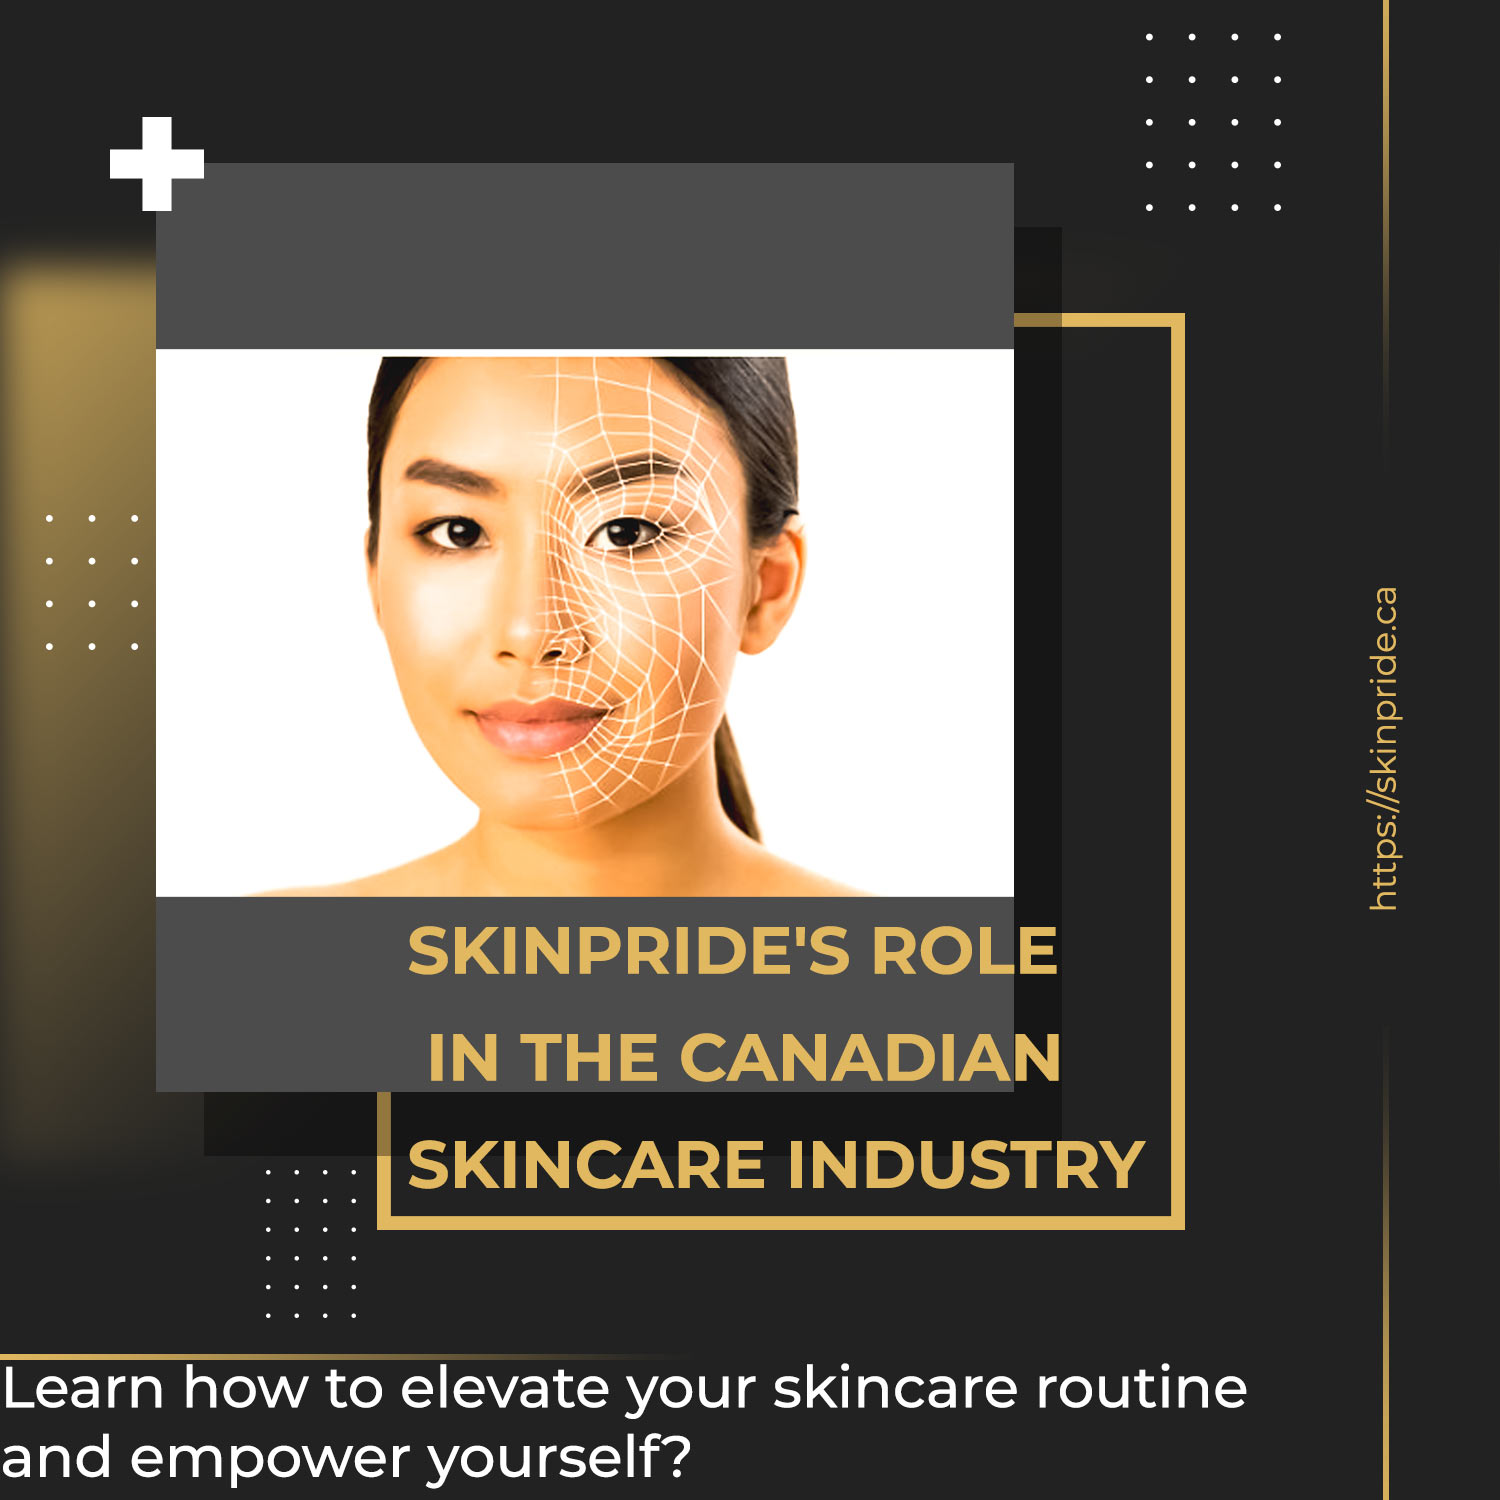 SkinPride has played a pivotal role in Canada's skincare industry.